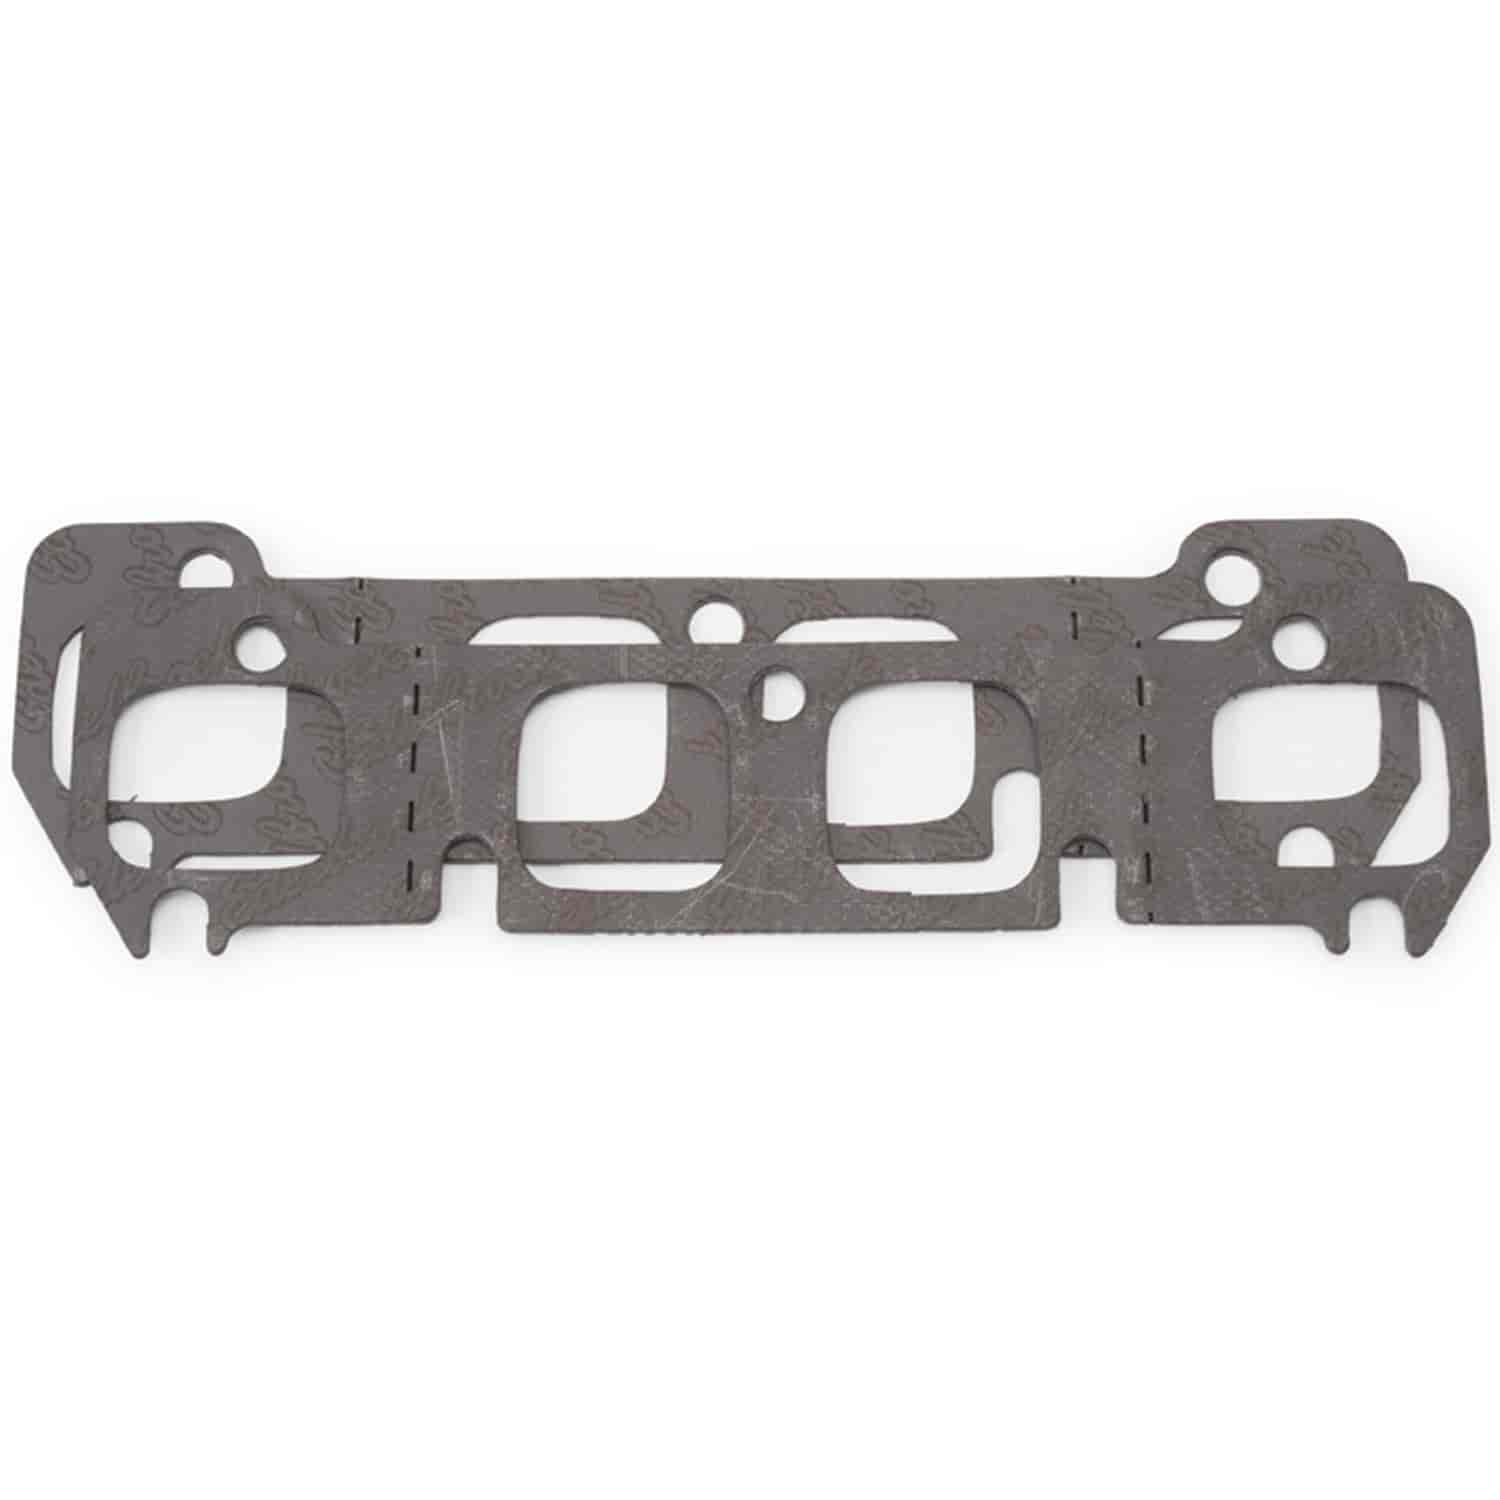 Exhaust Gaskets 1958-65 Chevy 348/409 (W Series)